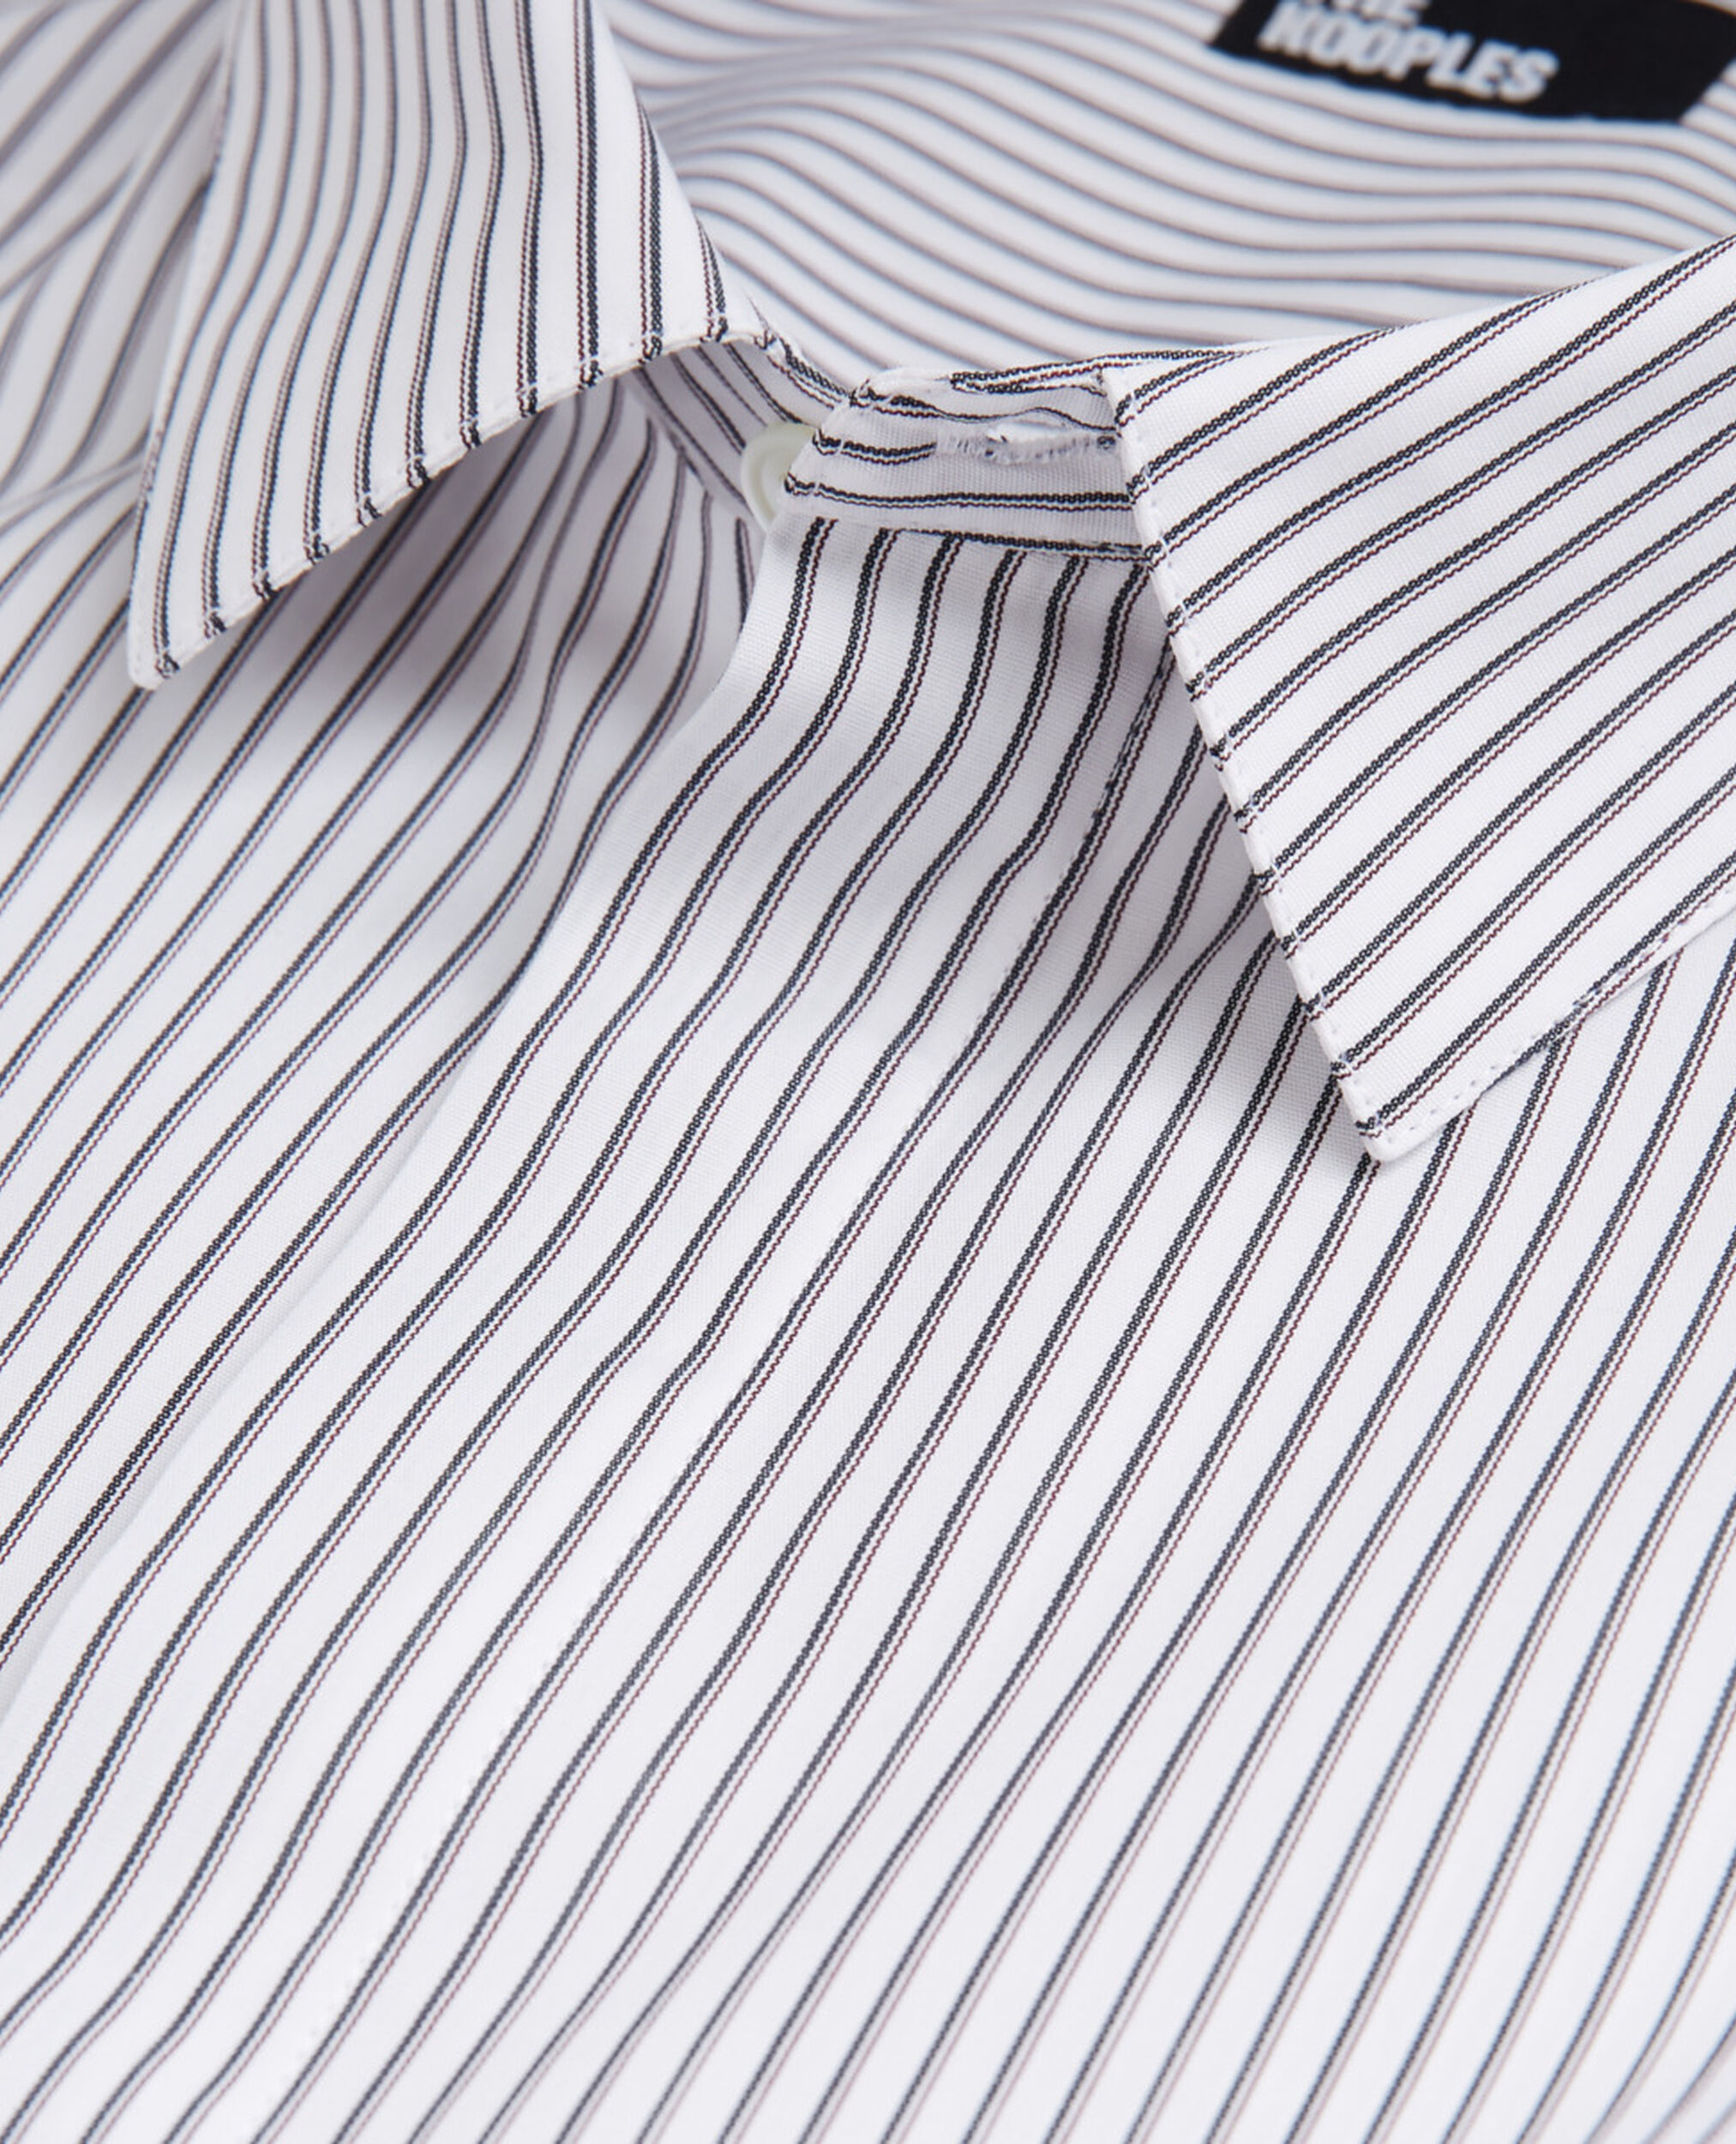 Chemise col classique à rayures, GREY-WHITE, hi-res image number null